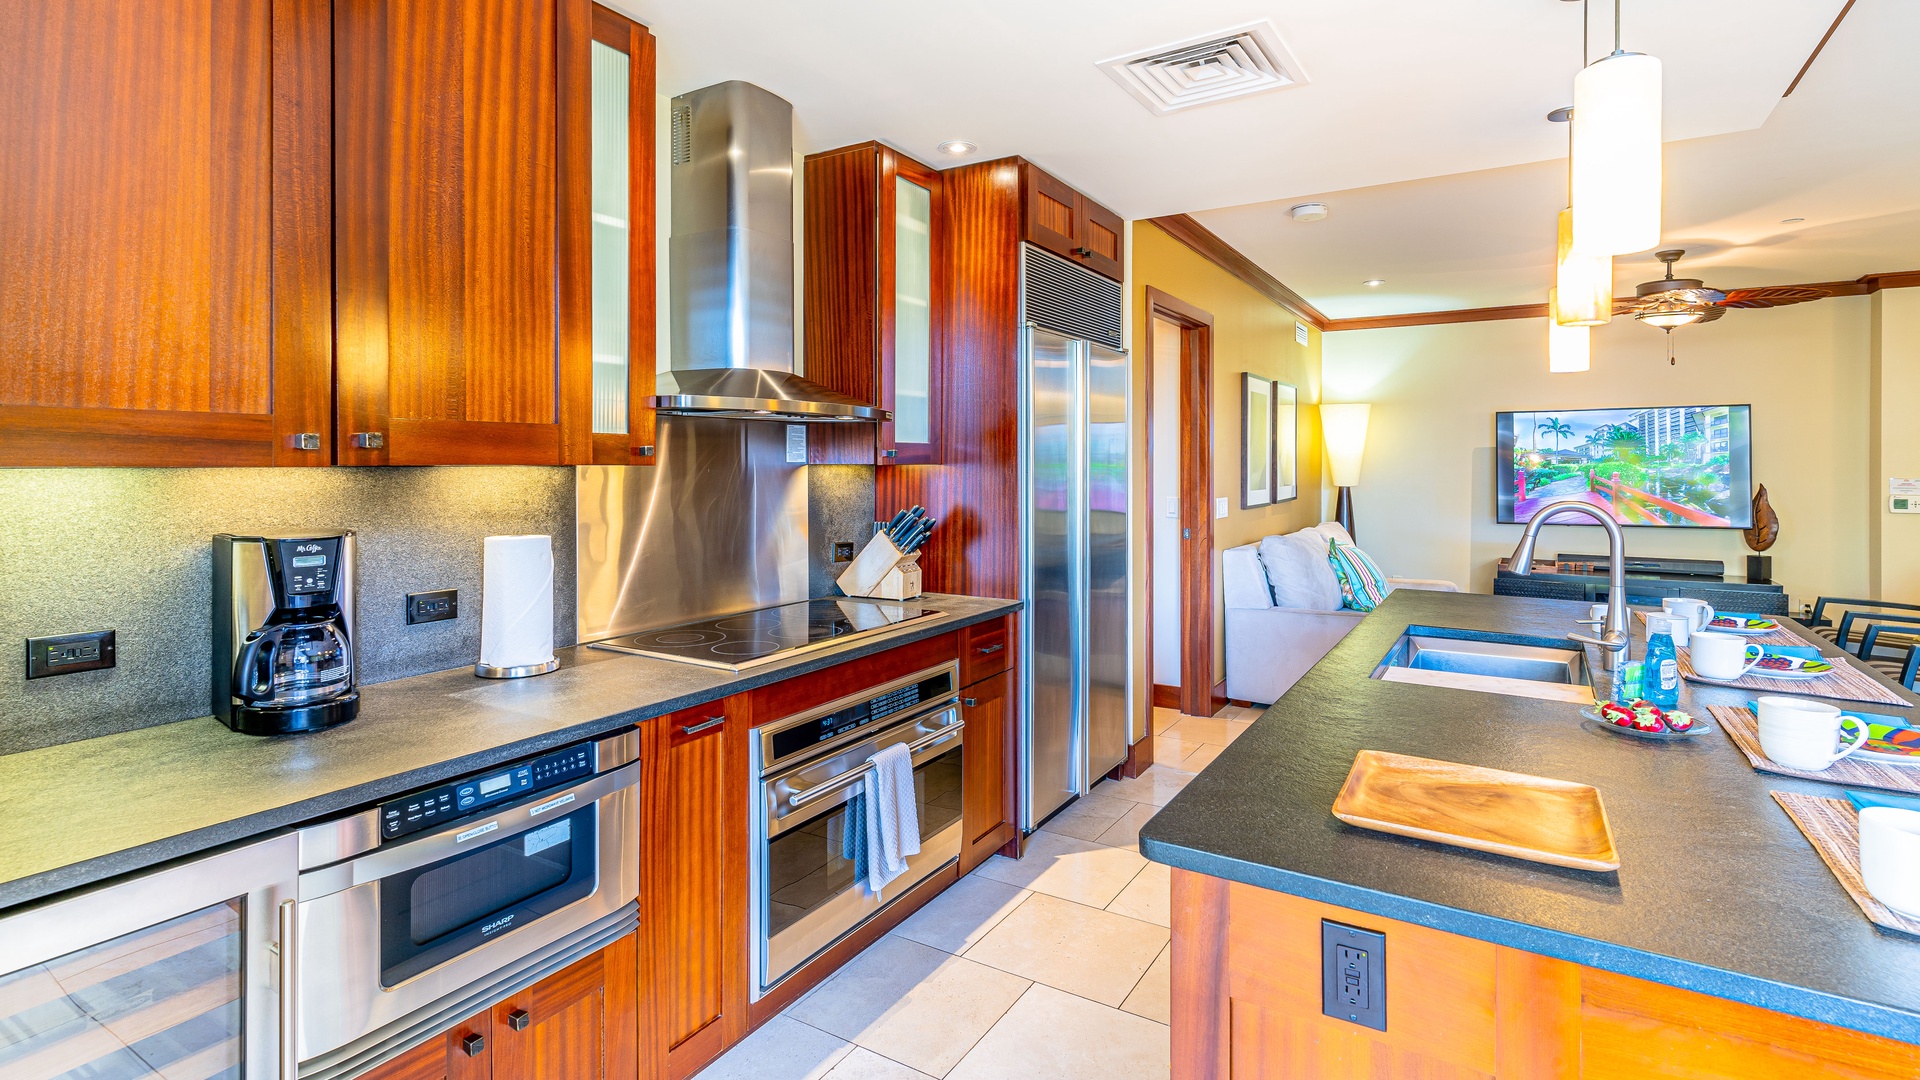 Kapolei Vacation Rentals, Ko Olina Beach Villas O224 - The kitchen has all the amenities you need for your culinary adventures.